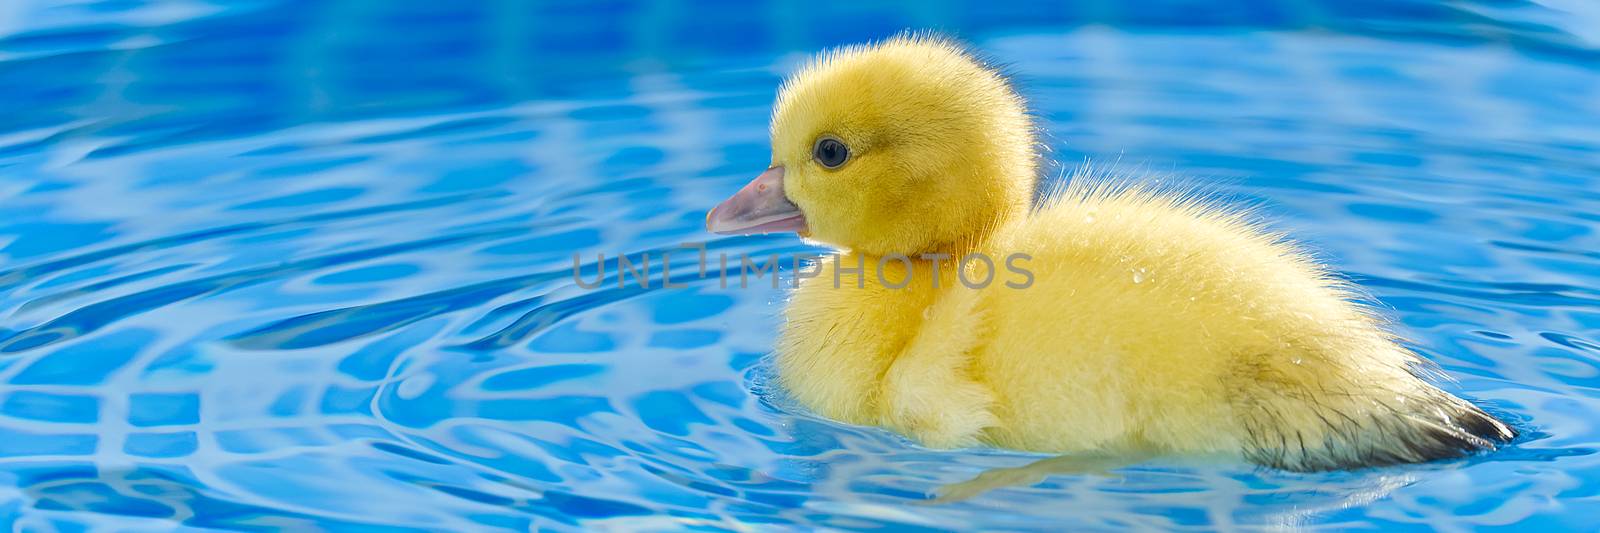 Yellow small cute duckling in swimming pool. Duckling swimming i by PhotoTime